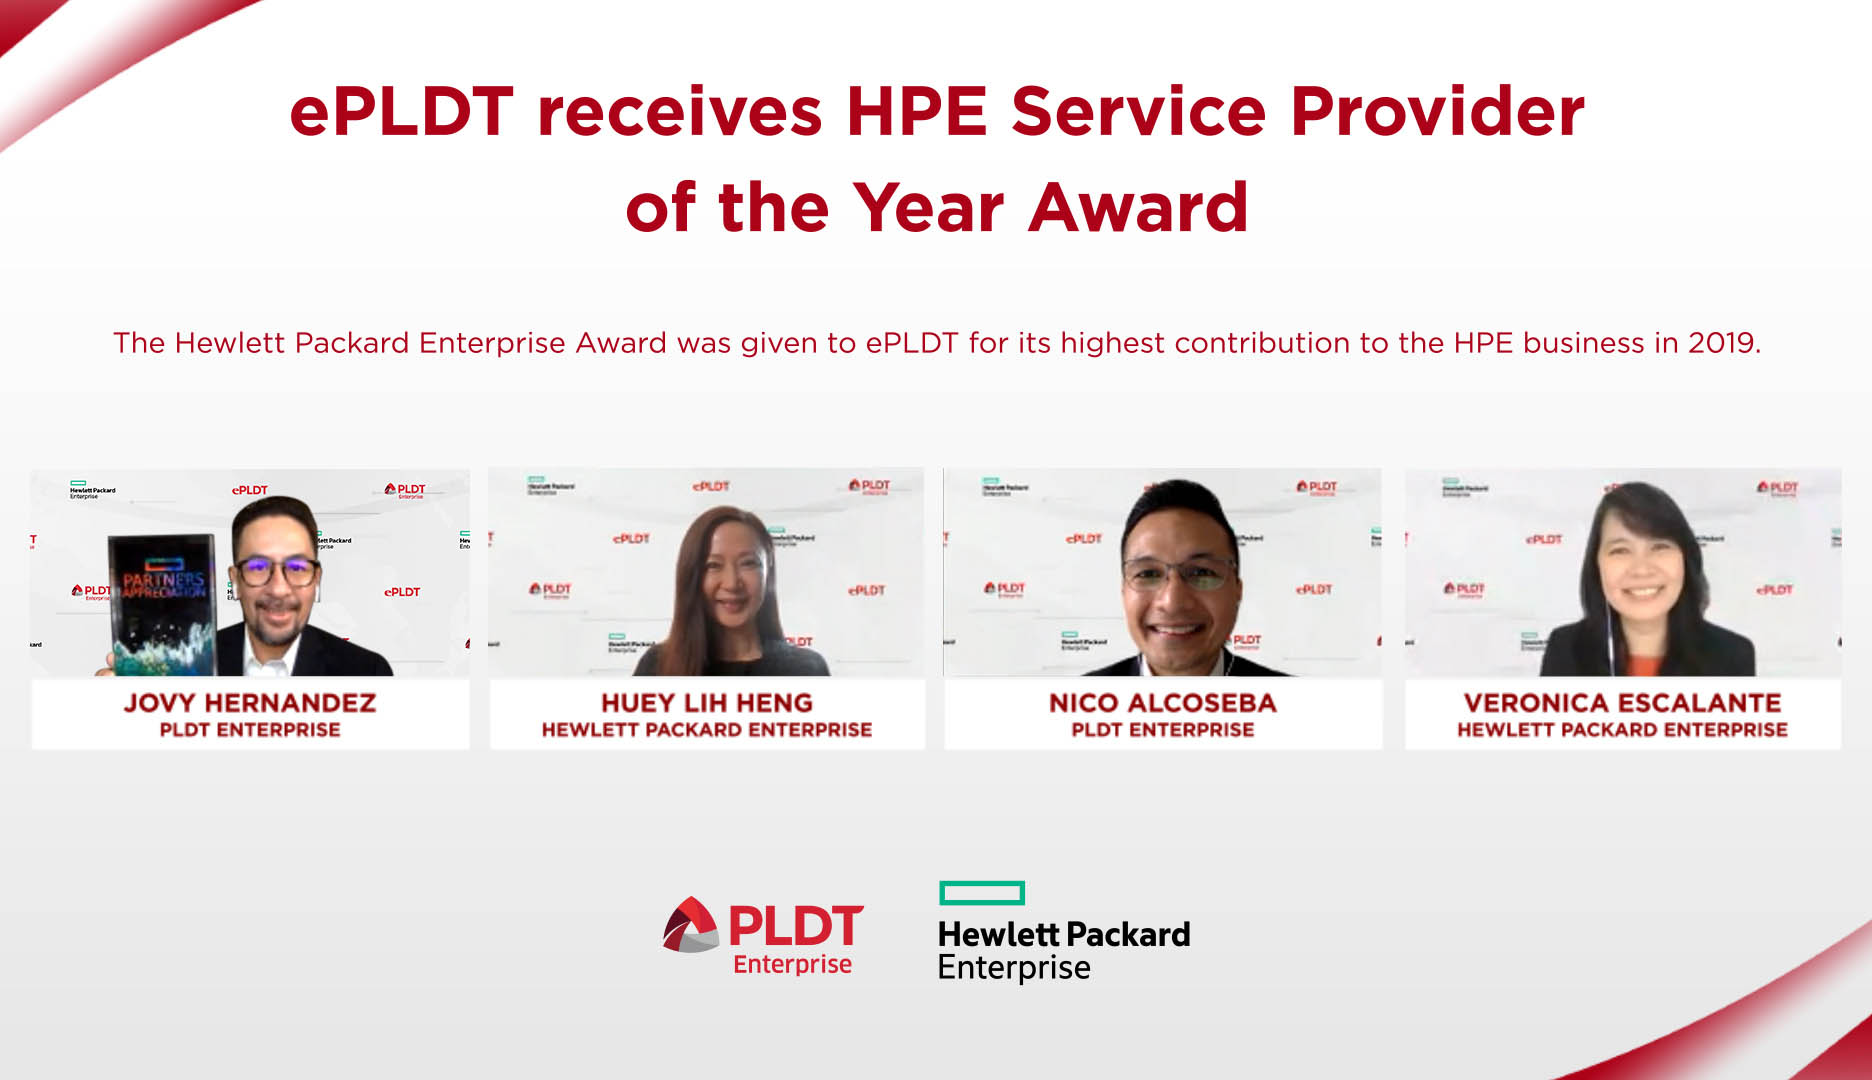 ePLDT receives HPE Service Provider of the Year Award